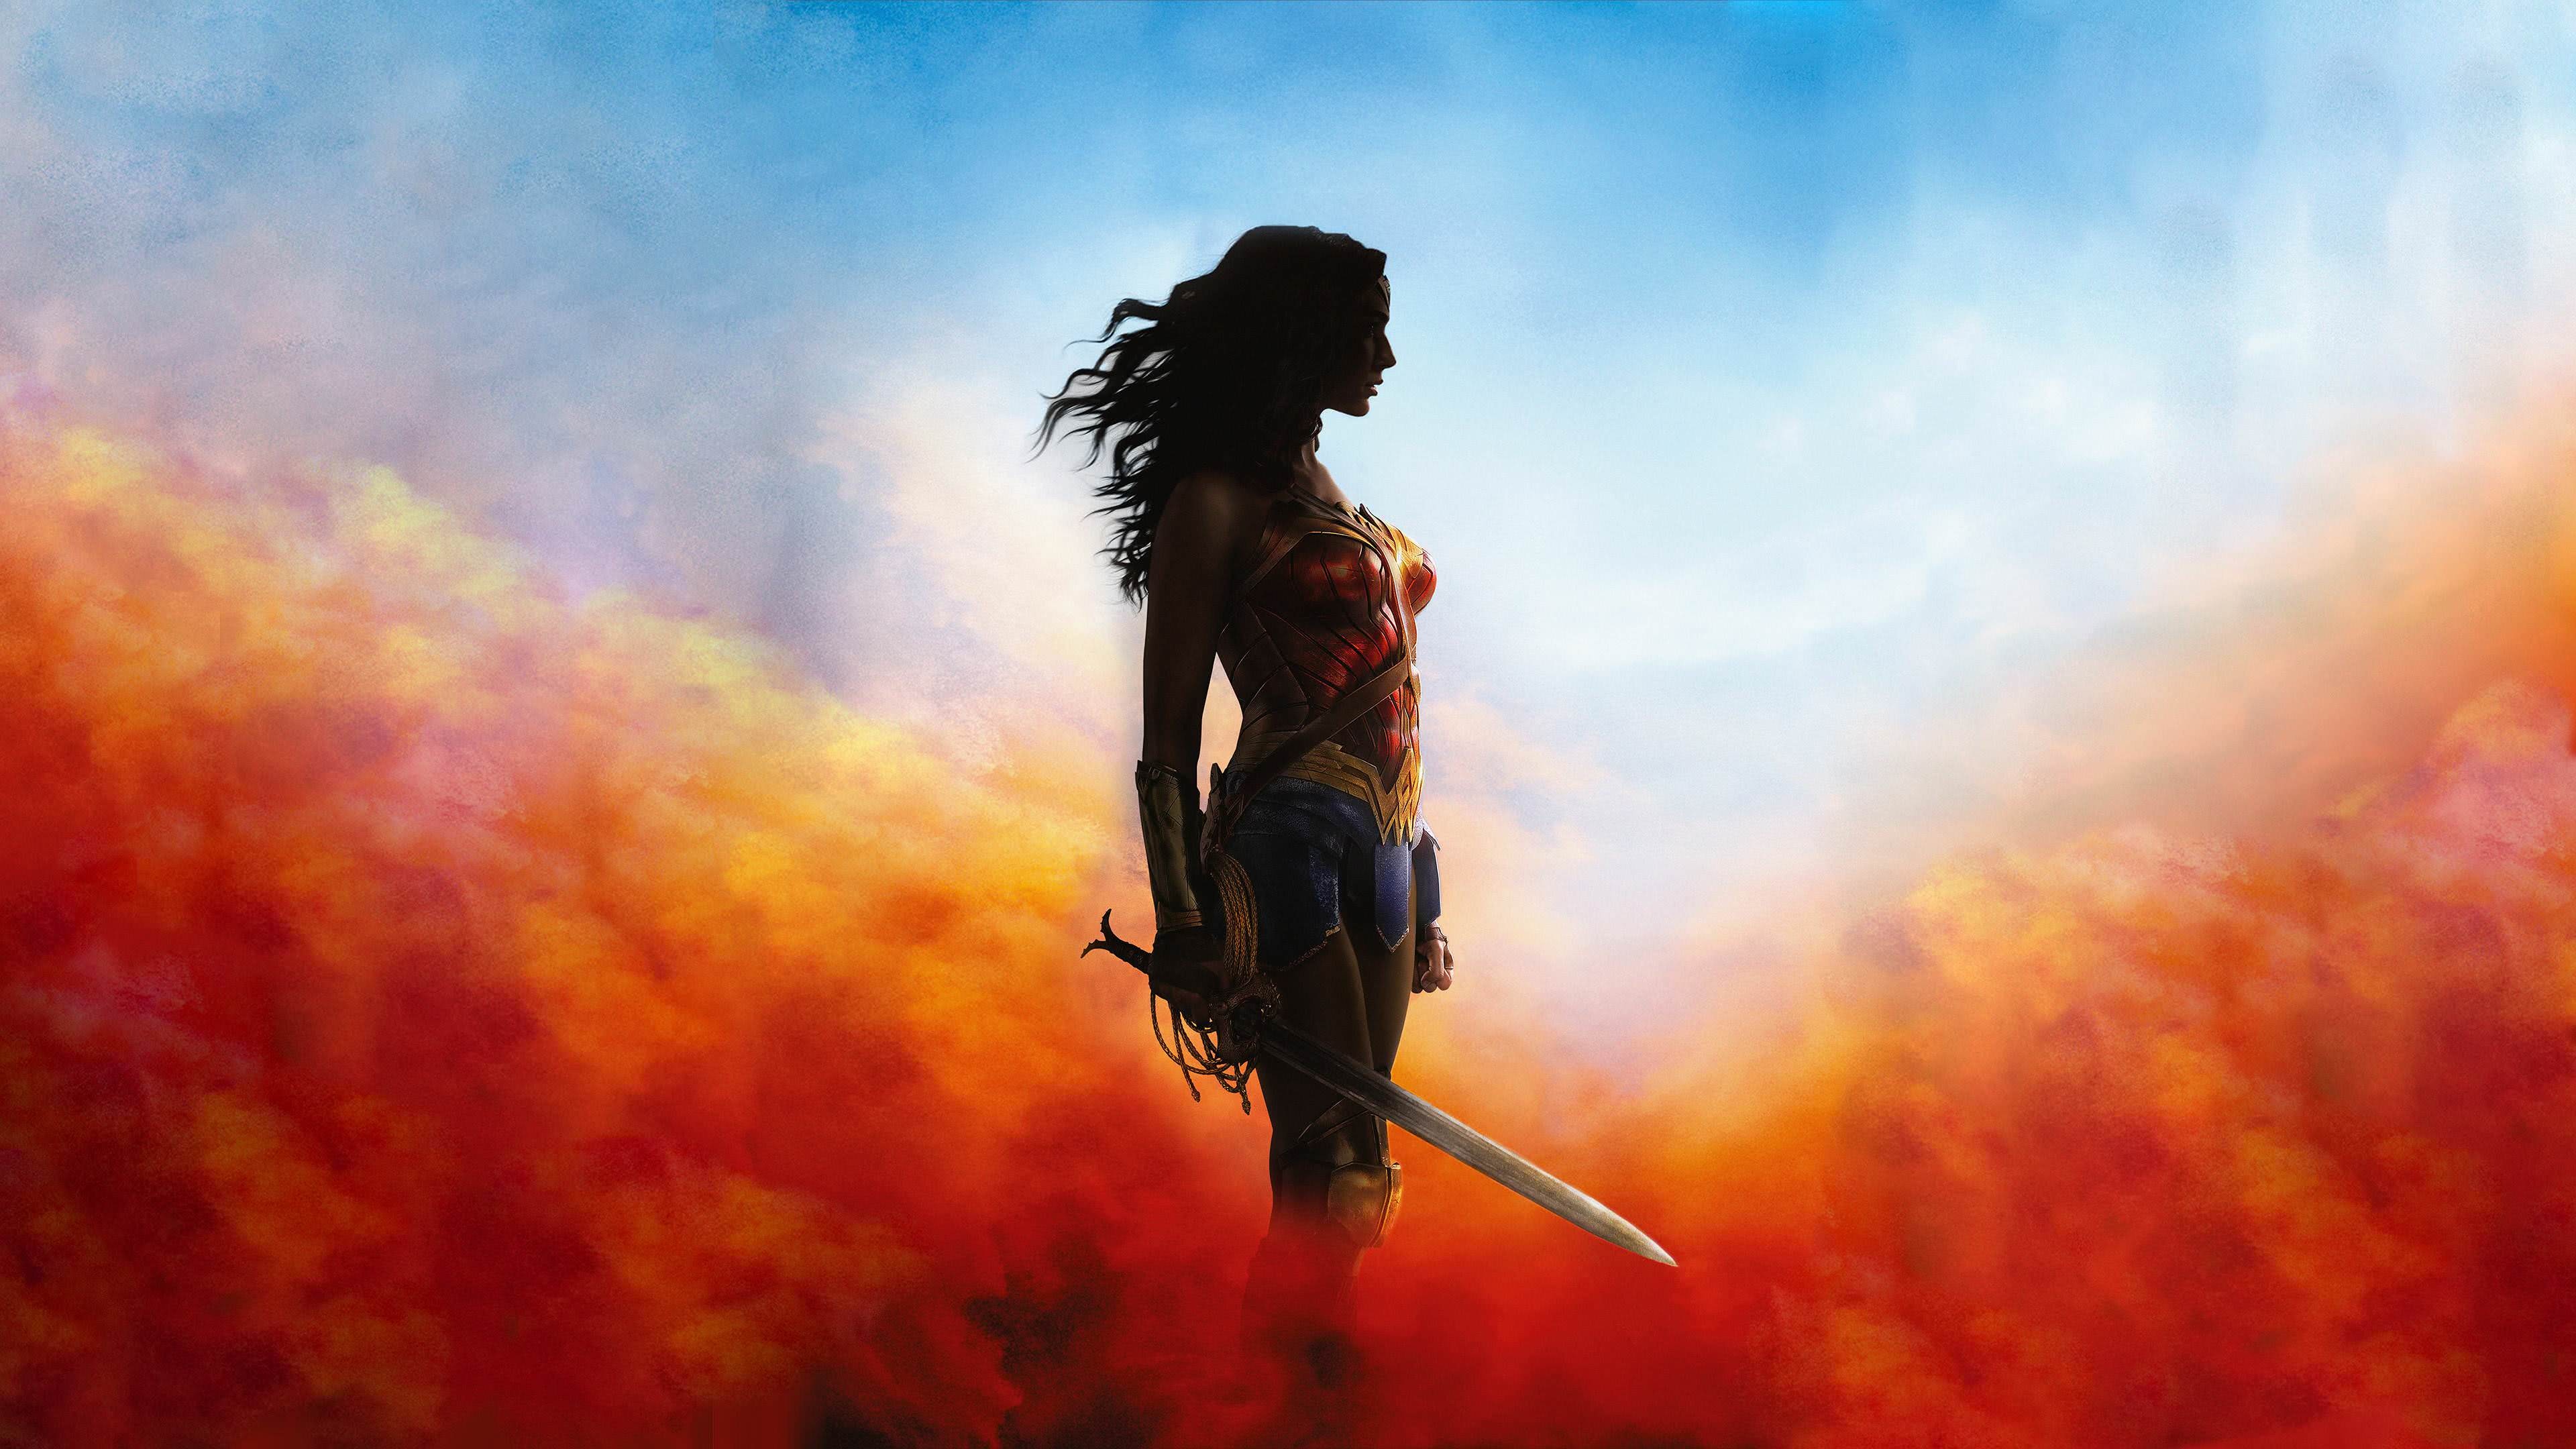 Wonder Woman (Movie) Wallpapers (36+ images inside)